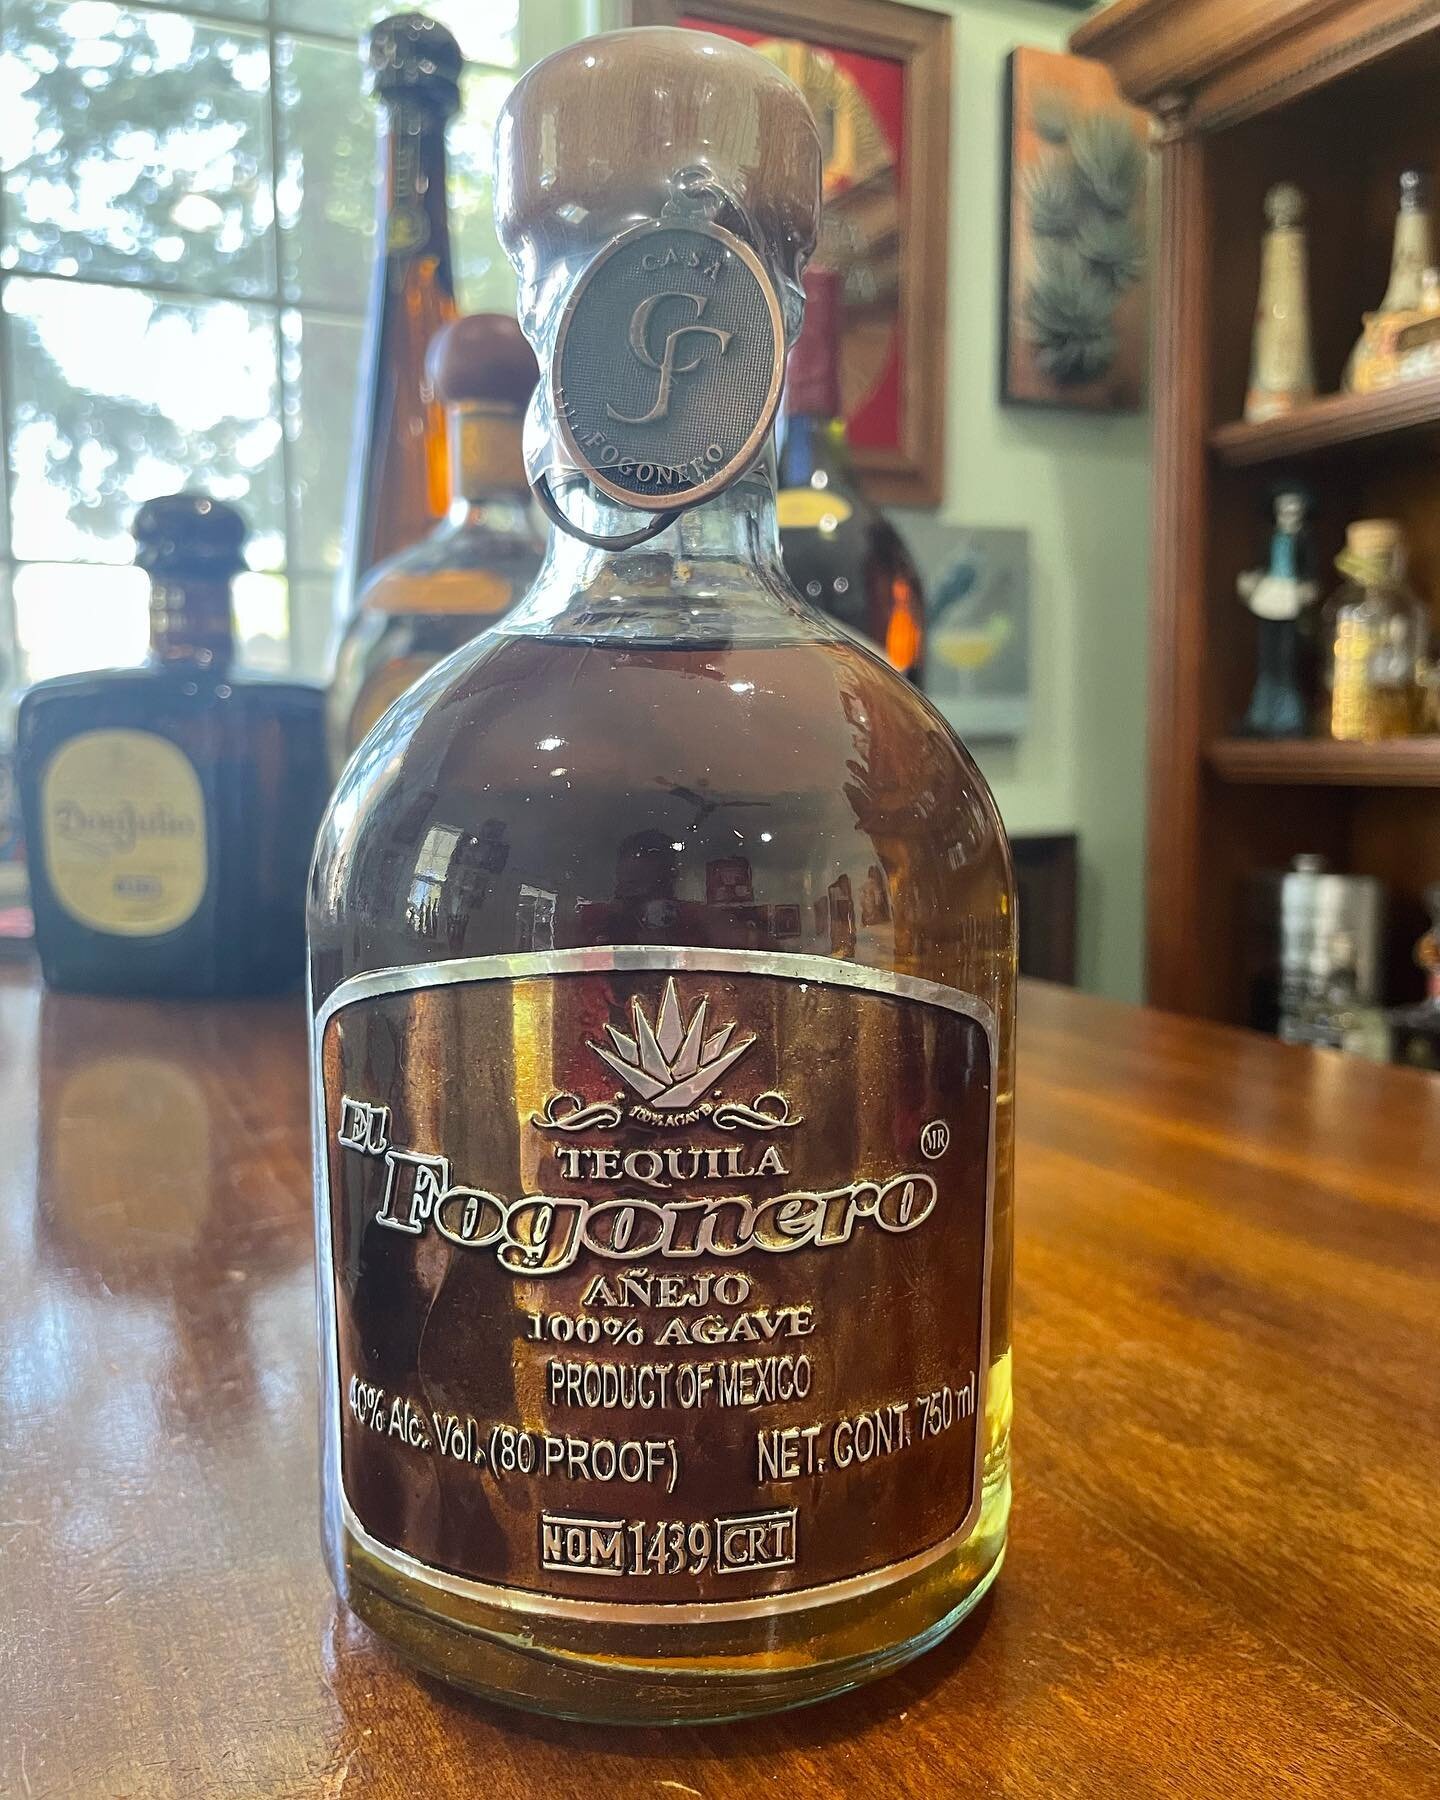 El Fogonero produces its portfolio of ultra premium tequilas in Jalisco&rsquo;s lowlands of Amatitan🥂 The anejo expression is aged for 18 months and is a fantastic after dinner sipper with tasting notes of cream soda, caramel, and roasted agave👌🏽 